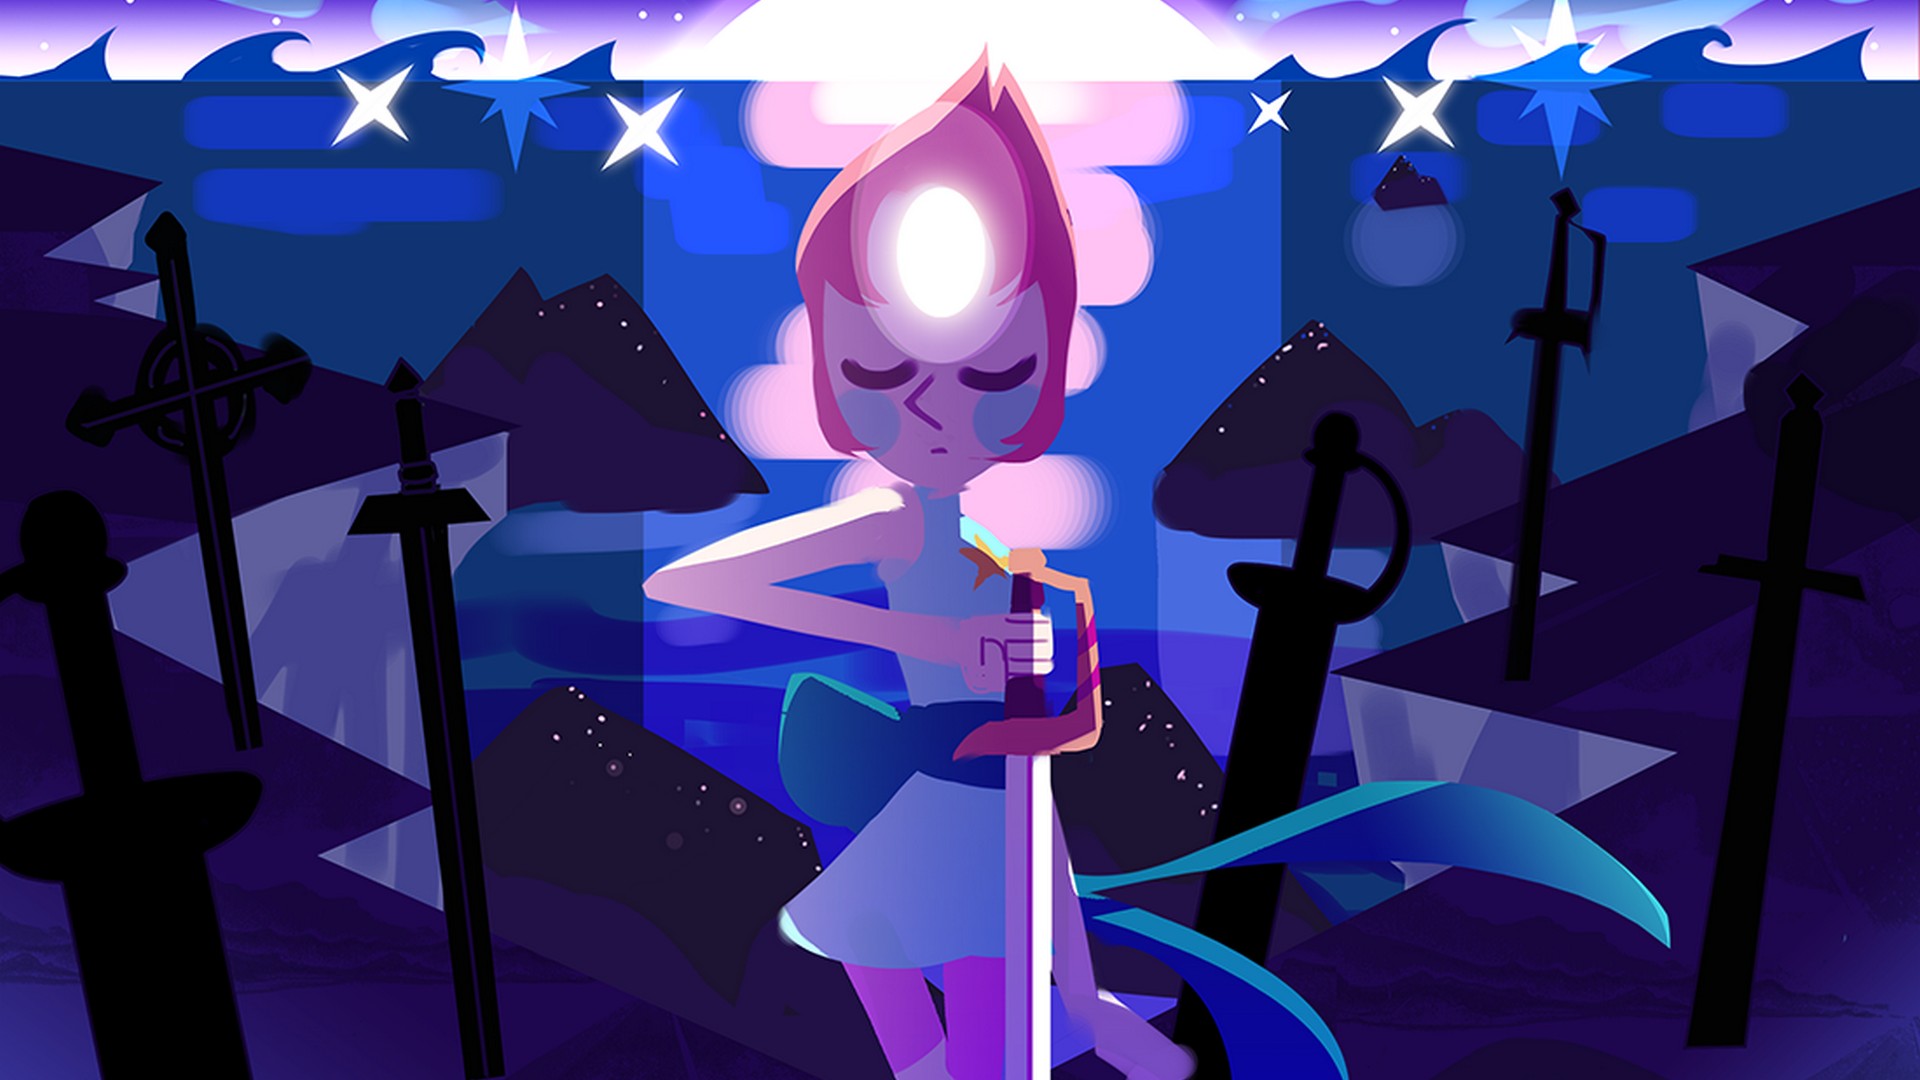 HD Wallpaper Steven Universe with high-resolution 1920x1080 pixel. You can use this wallpaper for your Desktop Computer Backgrounds, Mac Wallpapers, Android Lock screen or iPhone Screensavers and another smartphone device